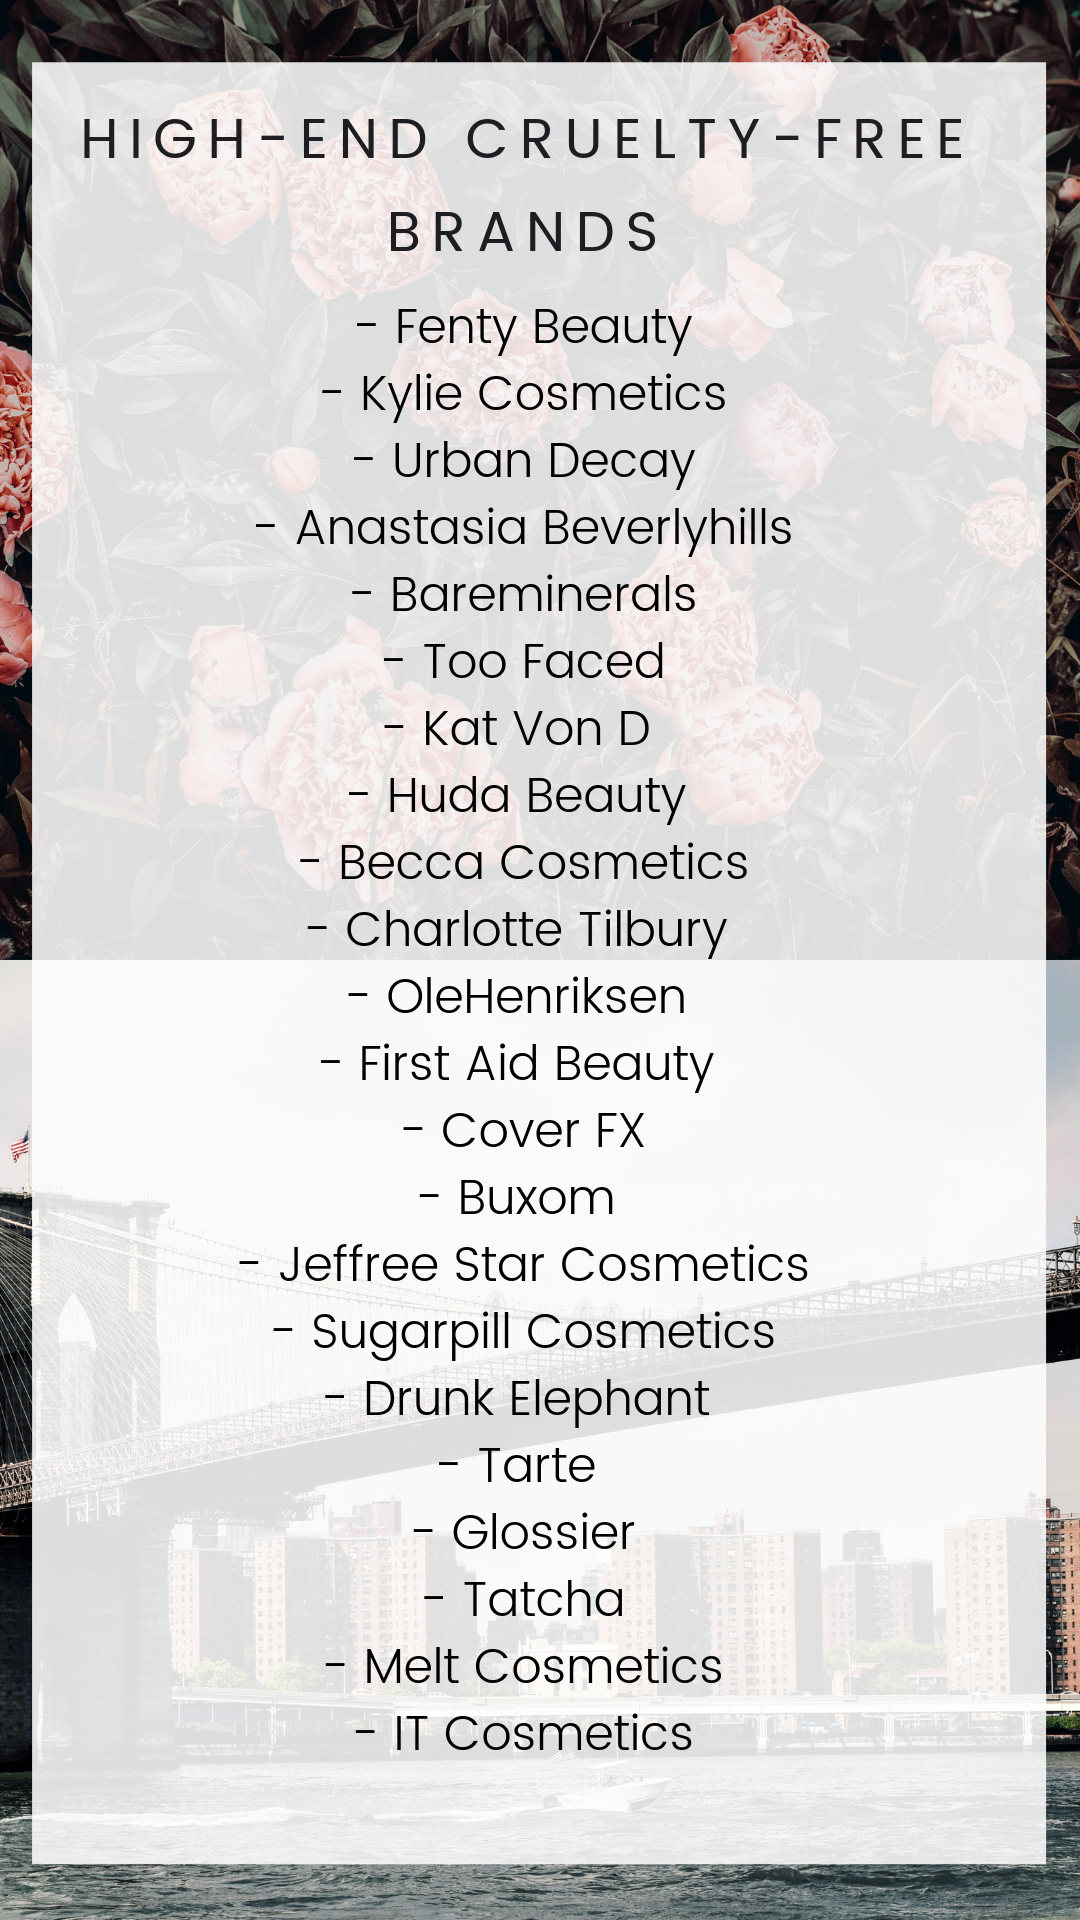 GOING CRUELTY-FREE // the ultimate guide - Mademoiselle O'Lantern - GOING CRUELTY-FREE // the ultimate guide - Mademoiselle O'Lantern -   18 beauty Products list ideas